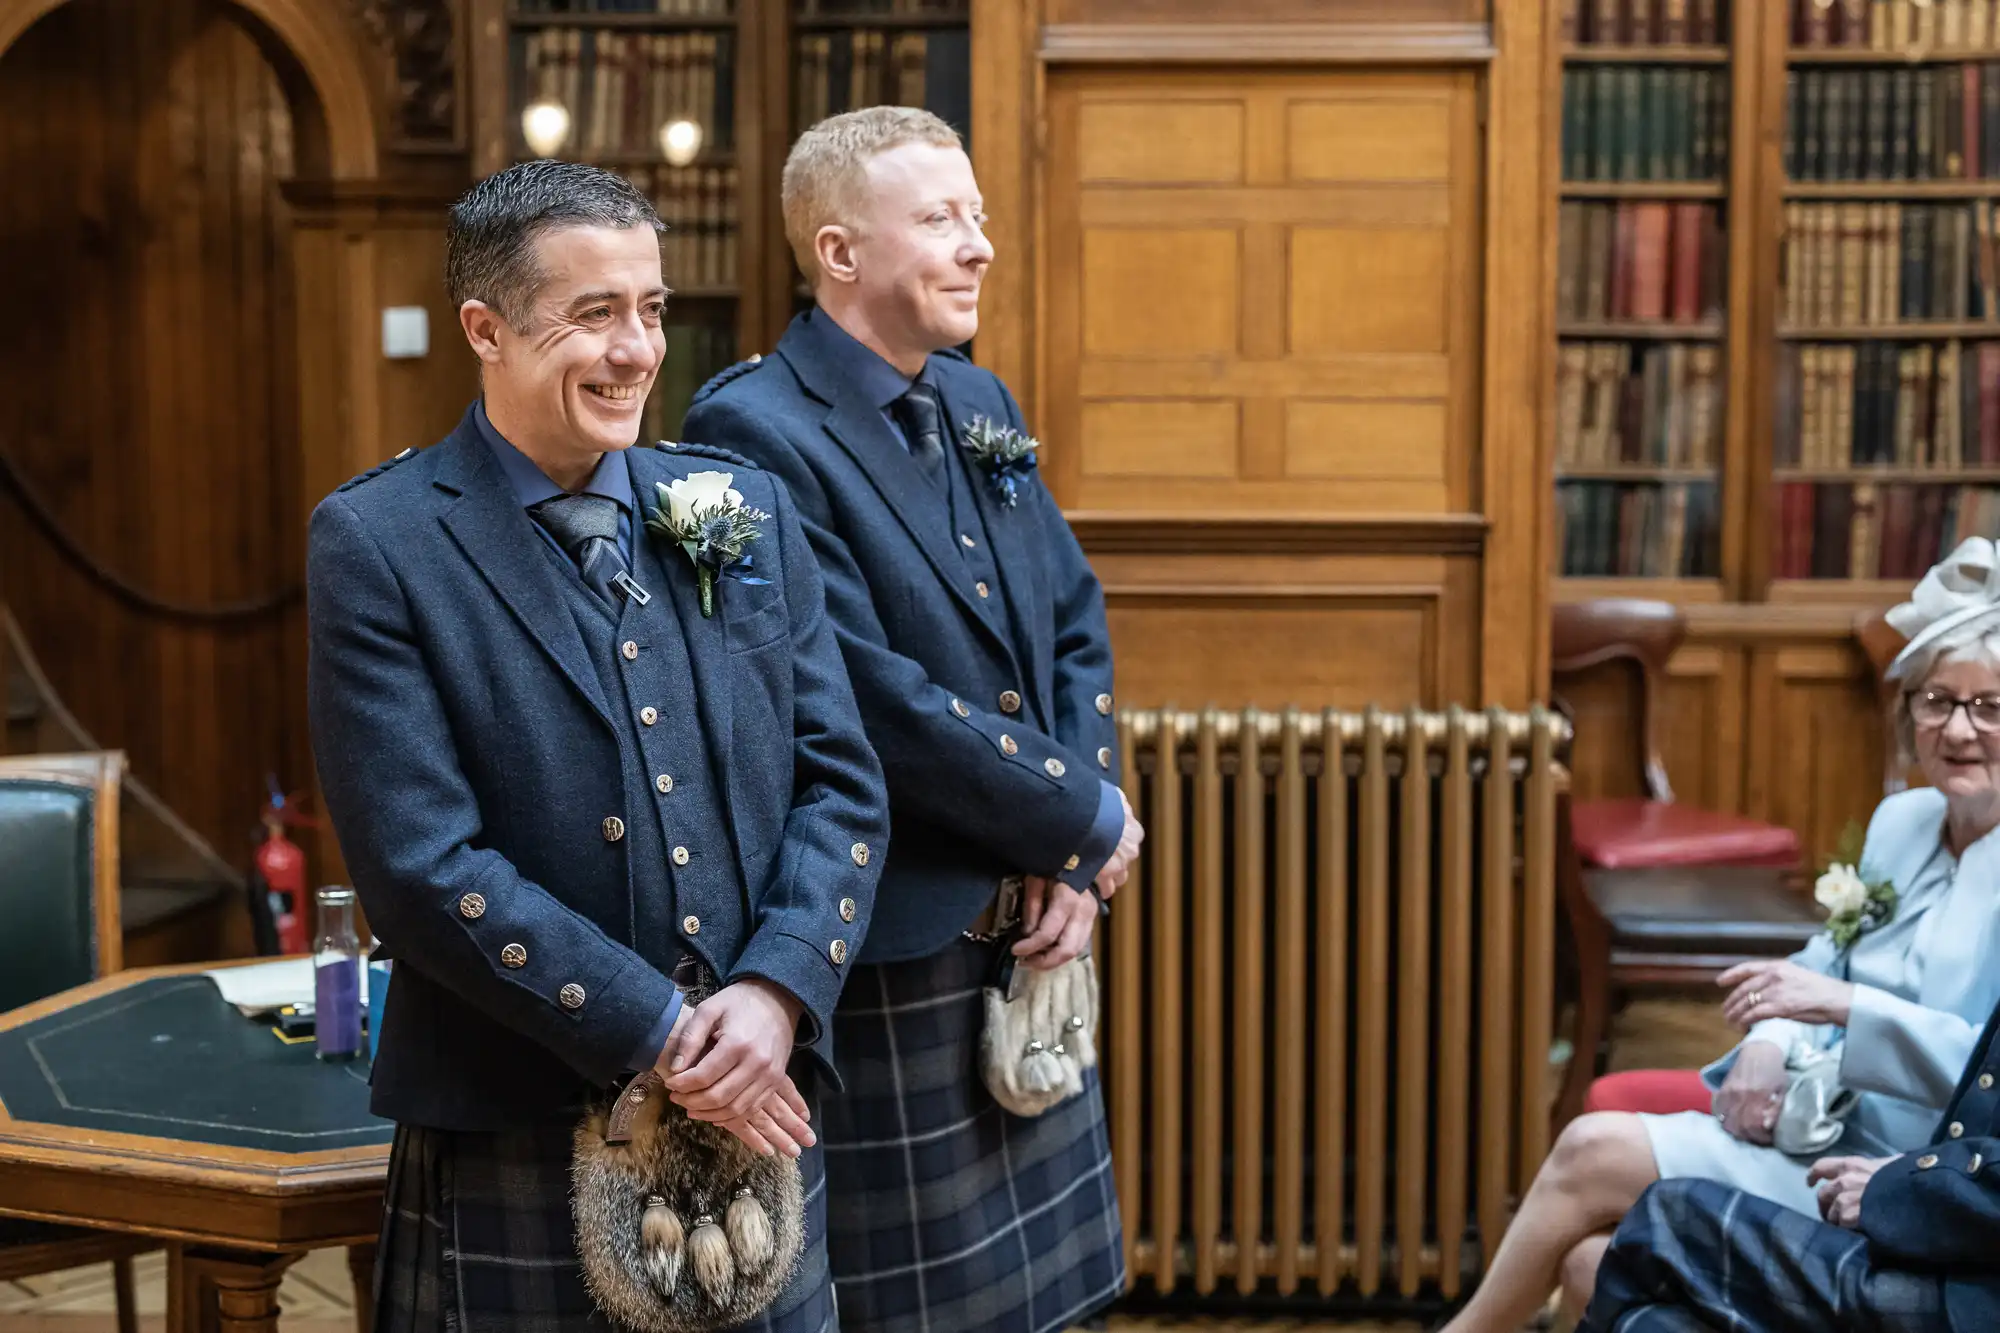 Two individuals wearing traditional Scottish kilts stand side by side, smiling in a wood-paneled room with bookshelves. An audience member is partially visible to the right.